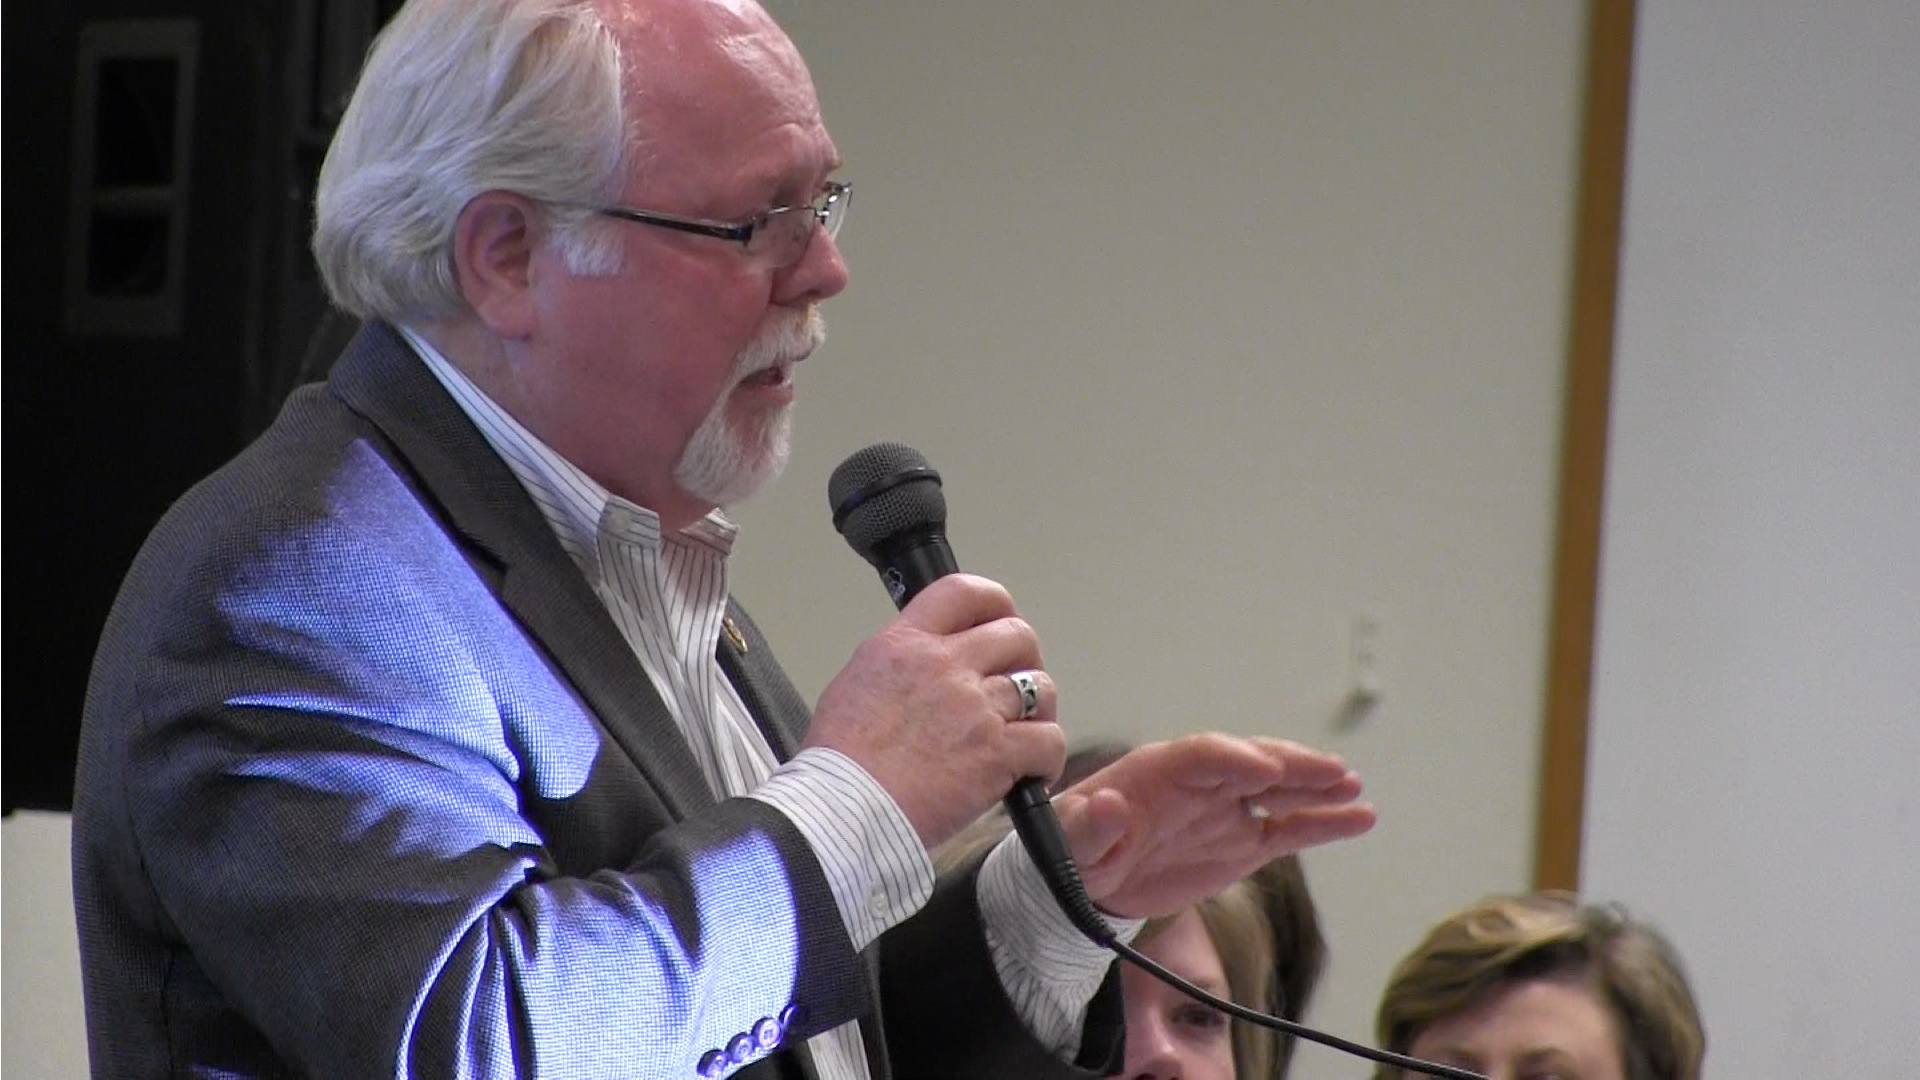 Rep. Ron Barber gives his speech on the GAO report this past week in Douglas, AZ. (Photo By: Aungelique Rodriguez)